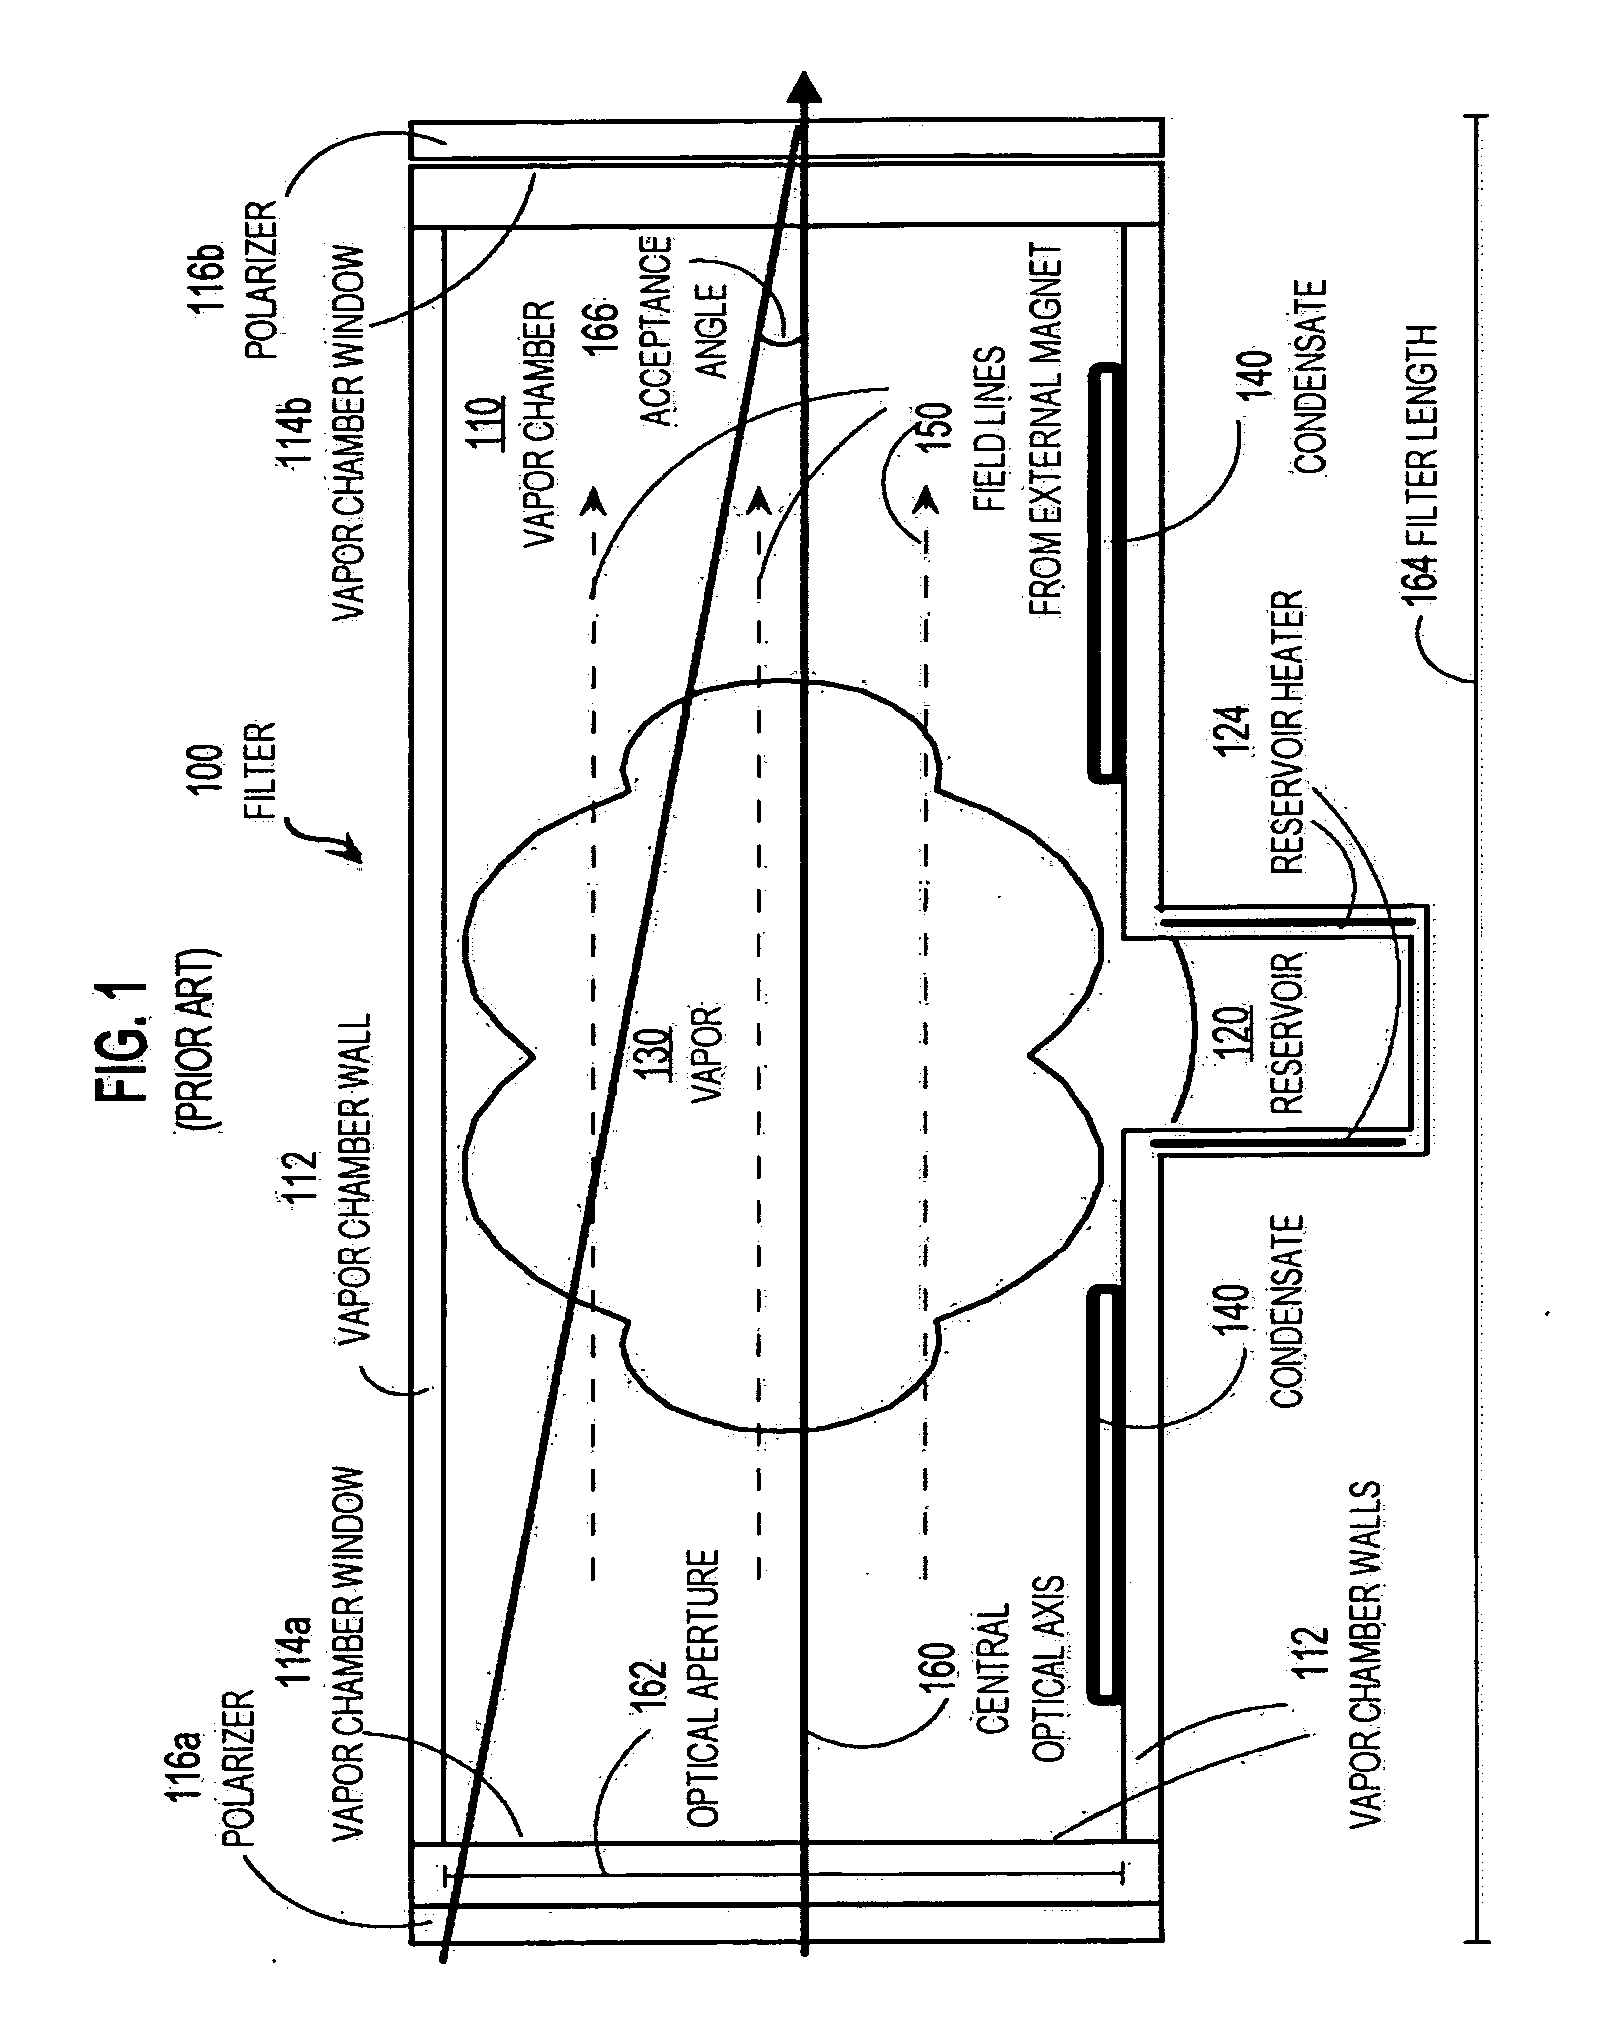 Apparatus and system for wide angle narrow-band optical detection in daylight